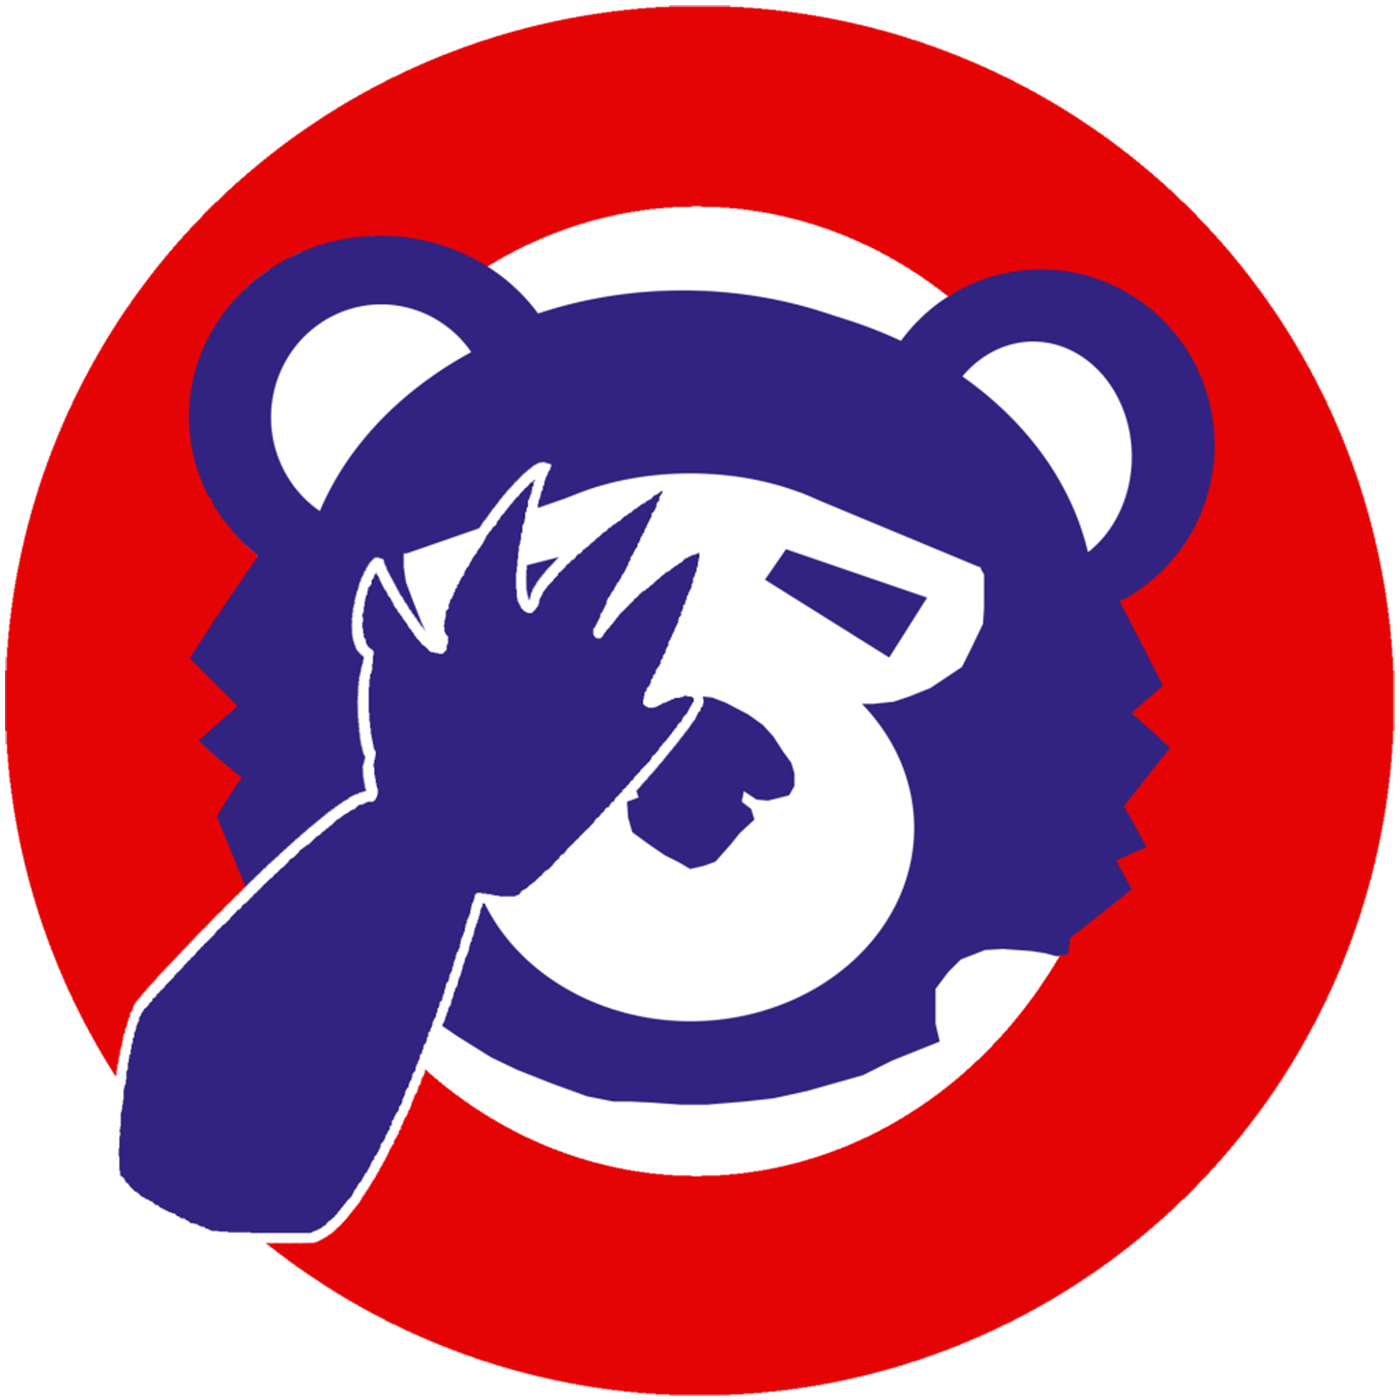 Hey @cubs social, what do ya say? I'm coming your way! Can't wait